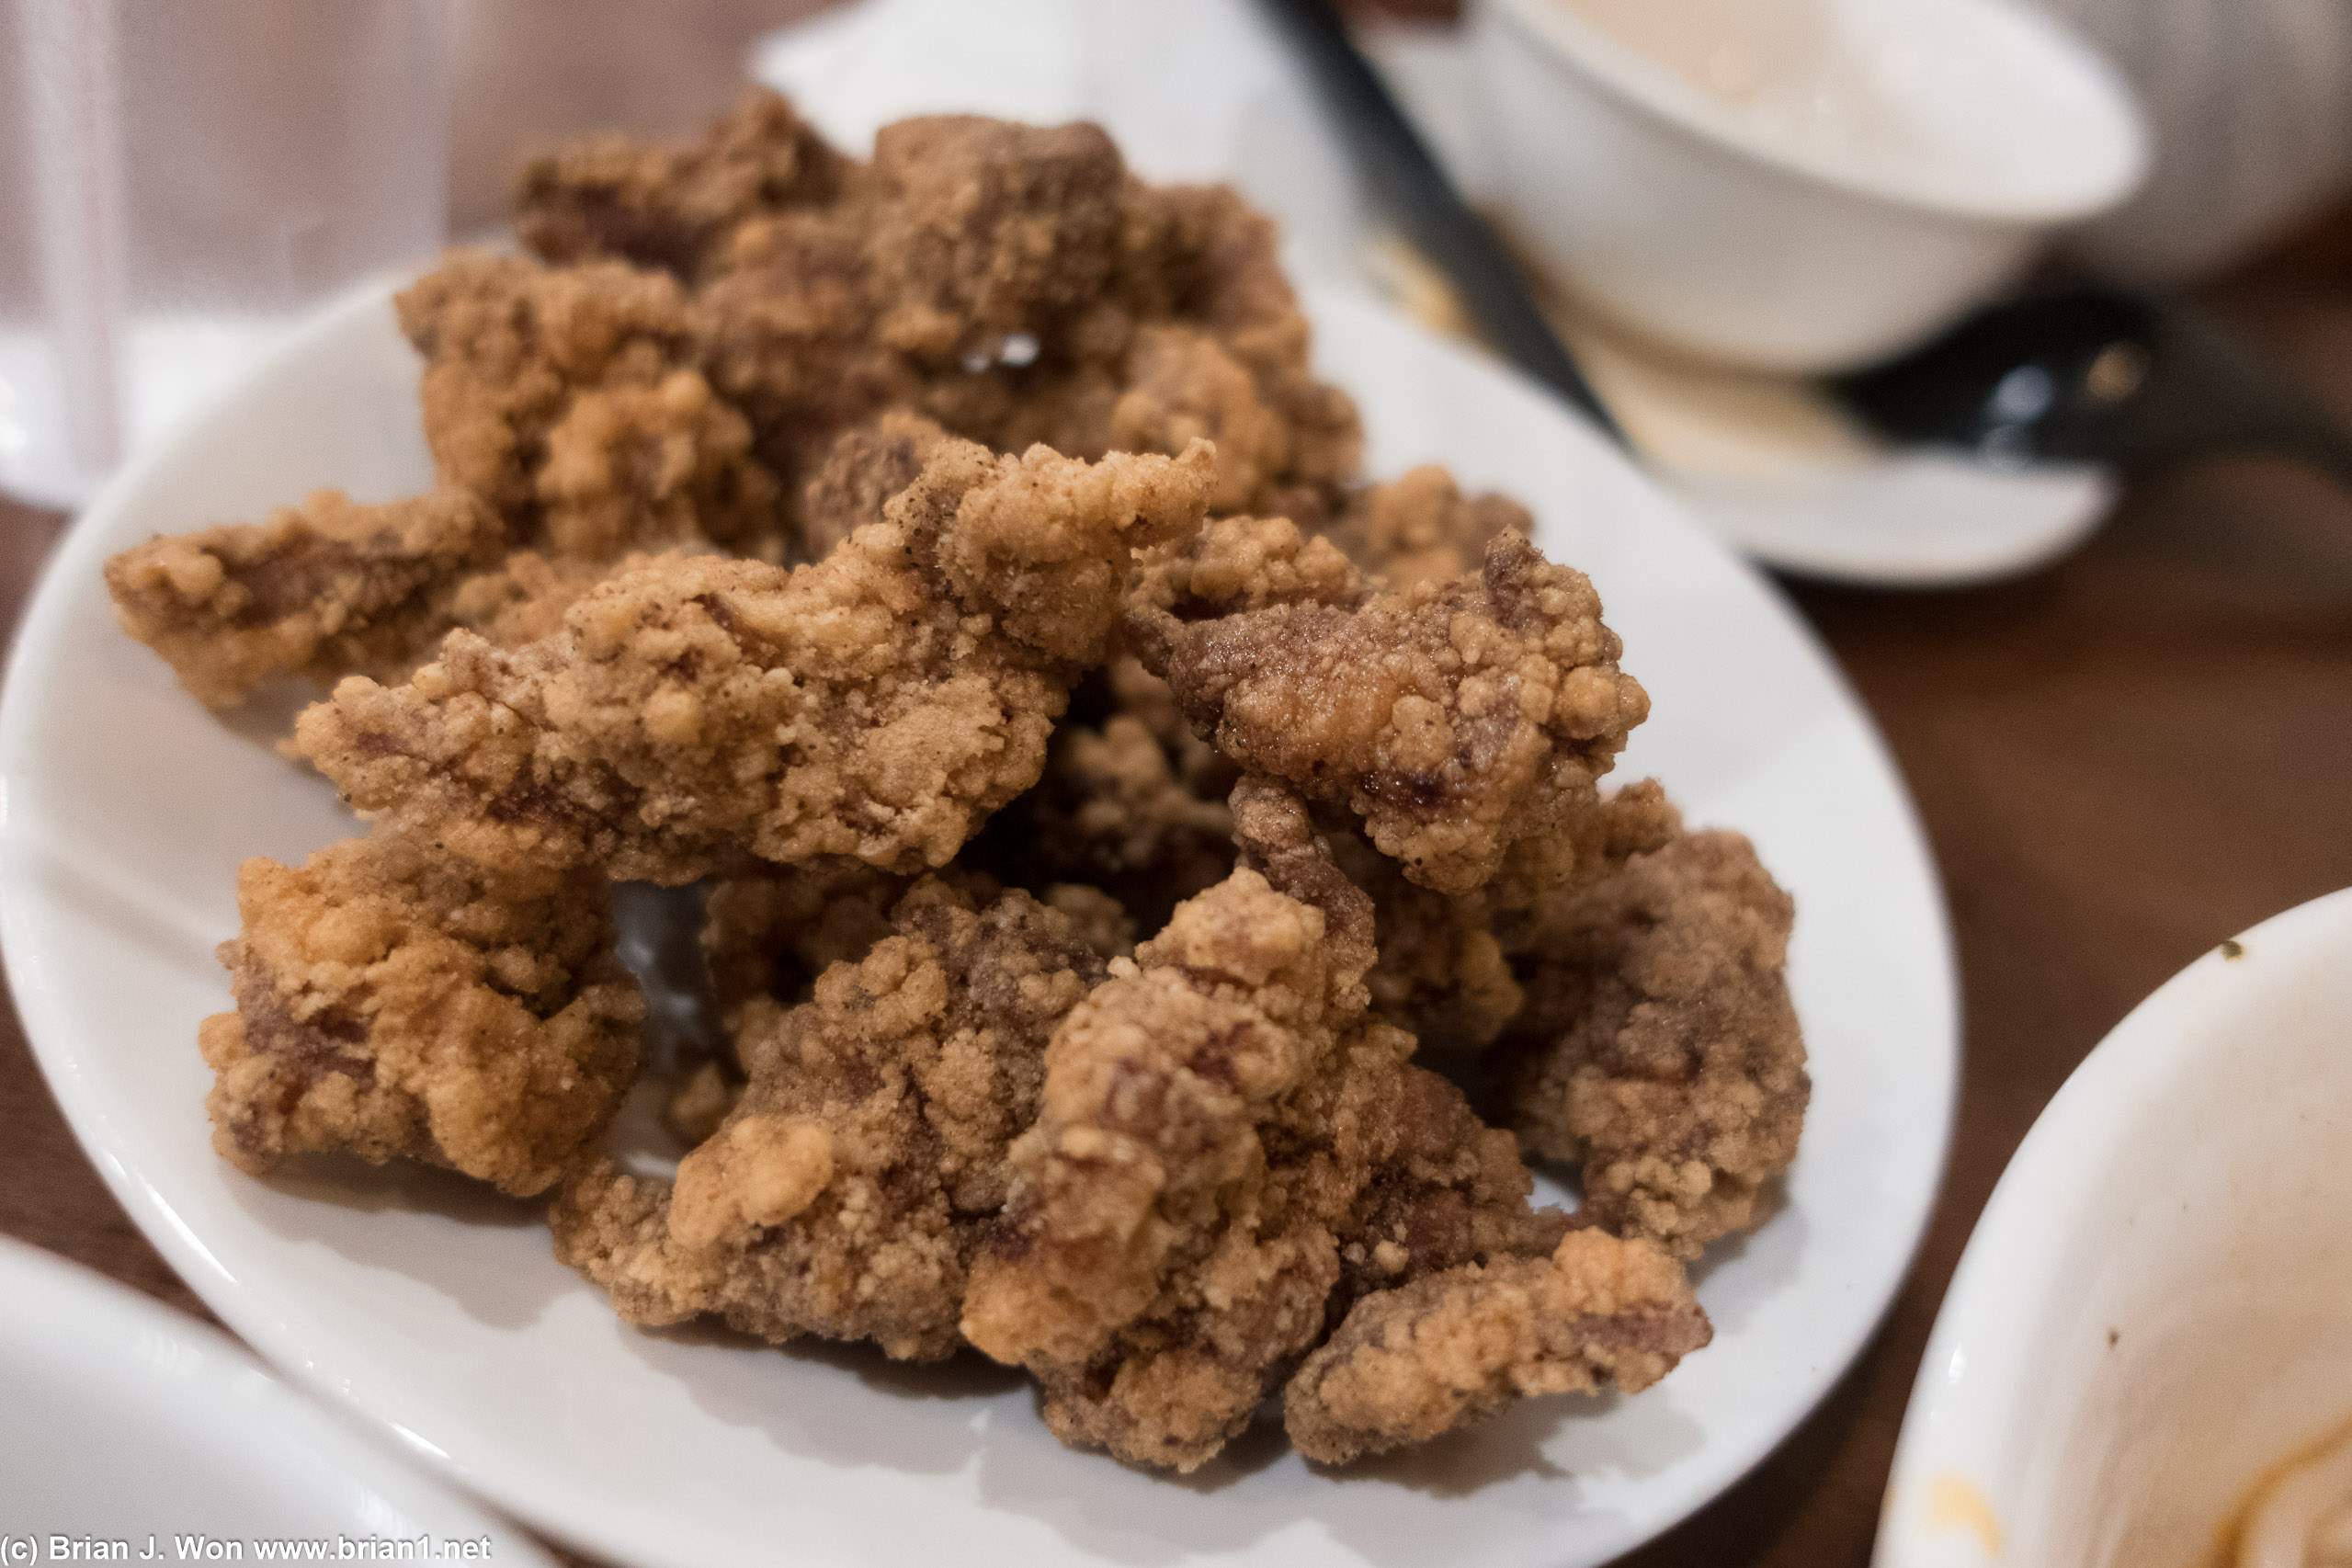 Fried chicken was deep fried too long. And zero spice.